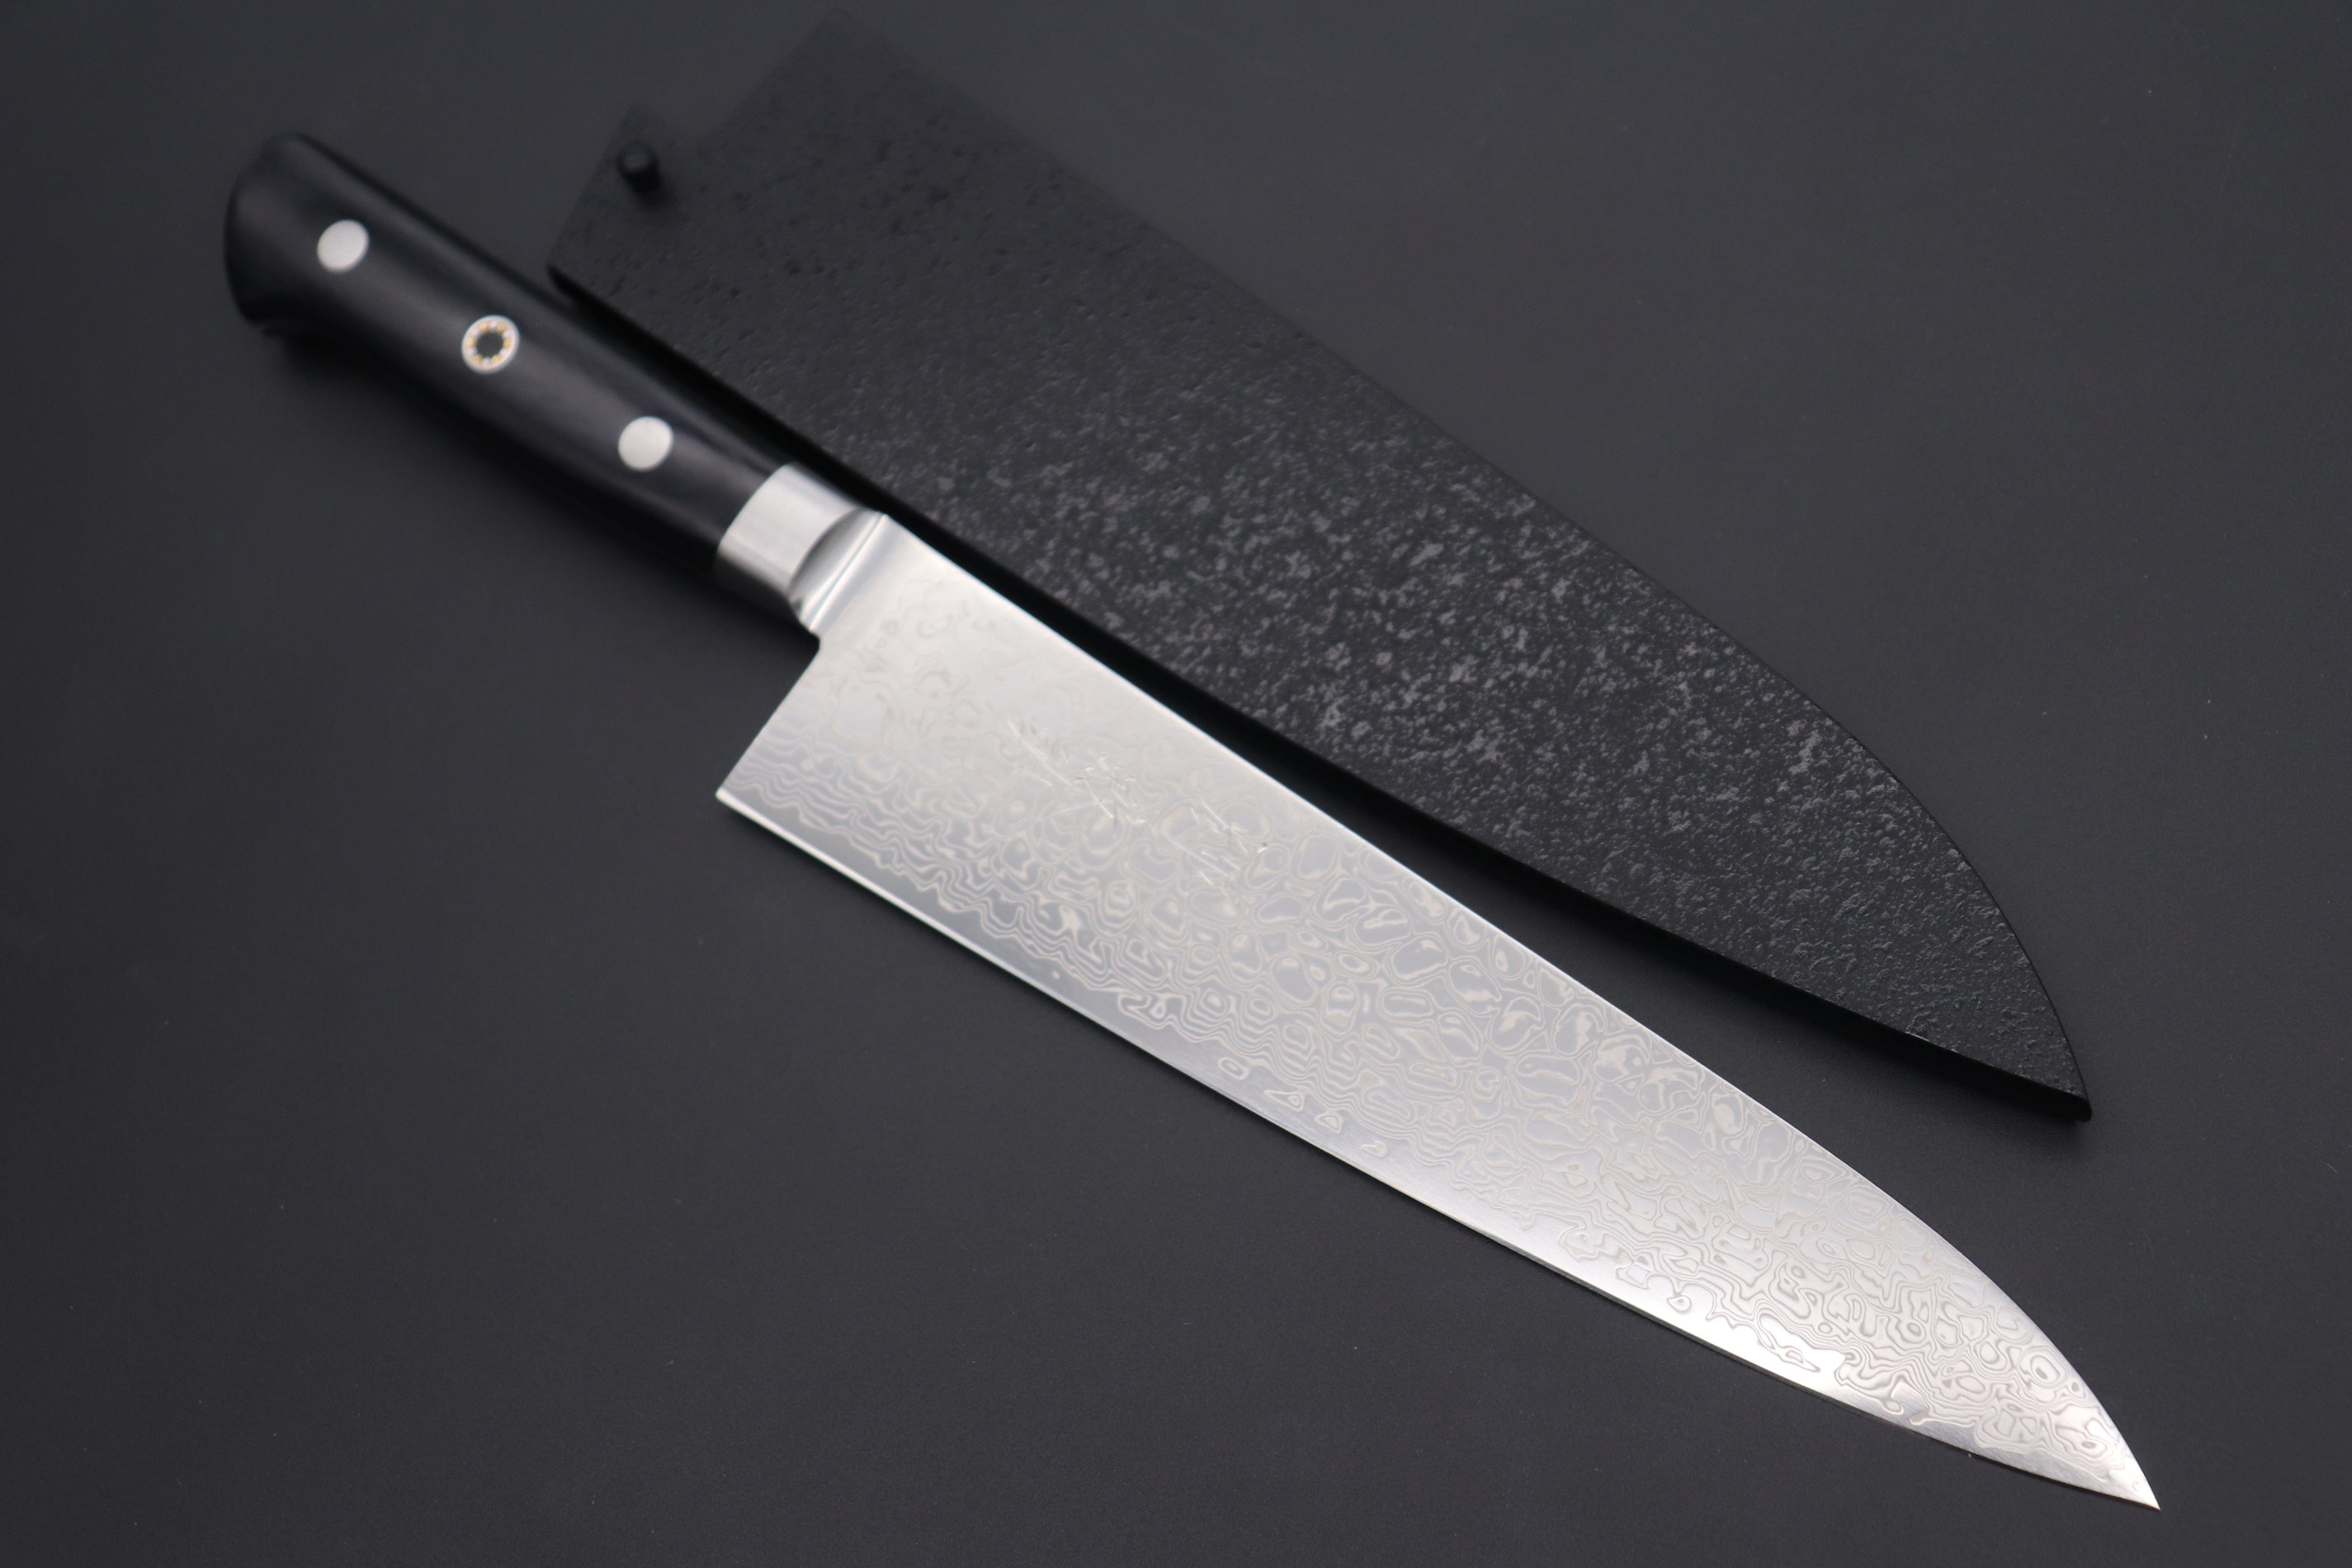 8 Inch Chef's Knife Japanese Damascus Style Stainless Steel Pro Kitchen  Knife